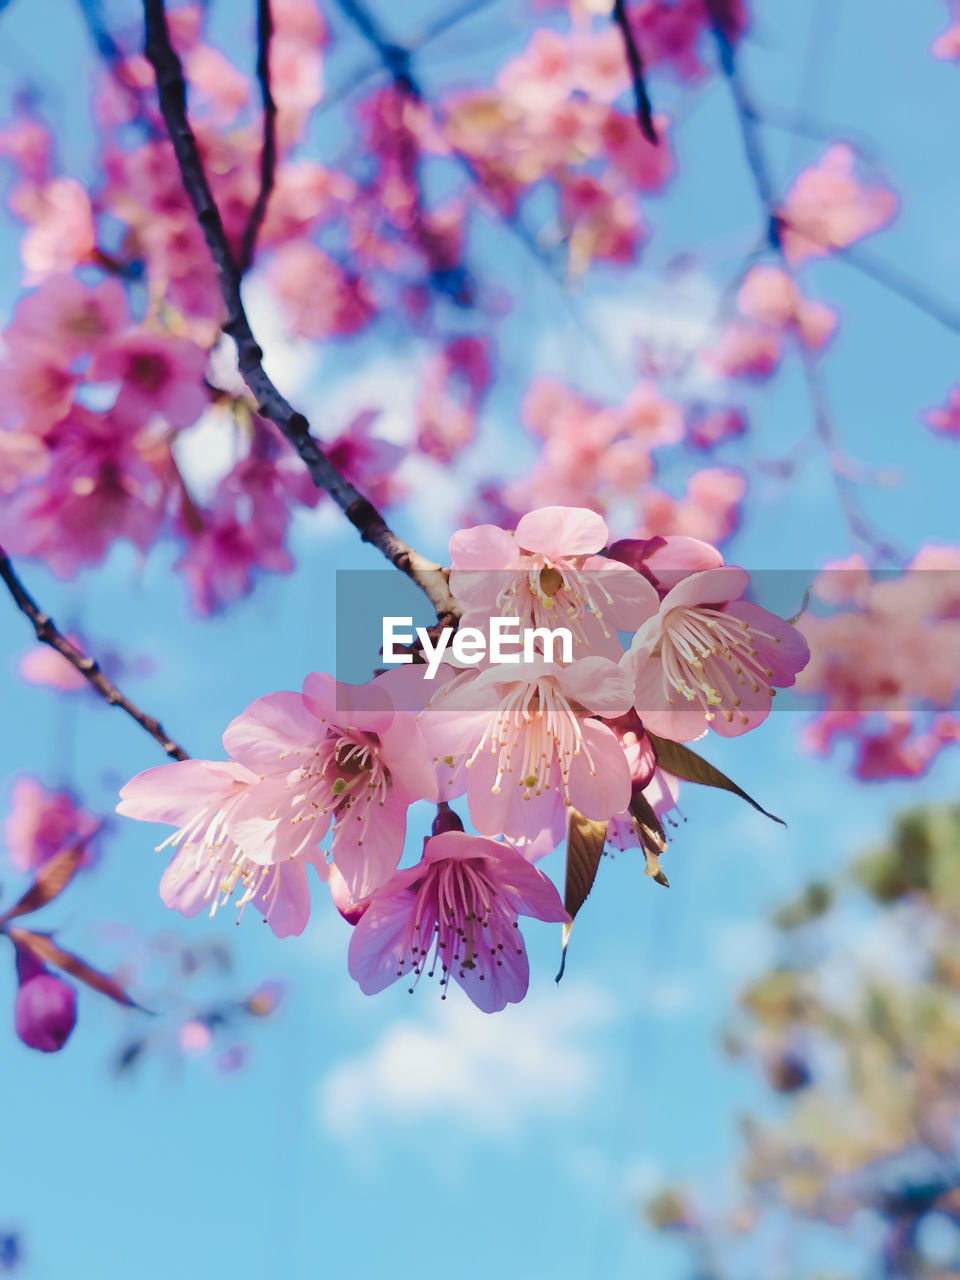 plant, flower, flowering plant, fragility, beauty in nature, blossom, springtime, freshness, pink, tree, nature, growth, branch, cherry blossom, close-up, spring, focus on foreground, sky, petal, no people, outdoors, flower head, inflorescence, blue, day, twig, botany, low angle view, cherry tree, selective focus, pollen, produce